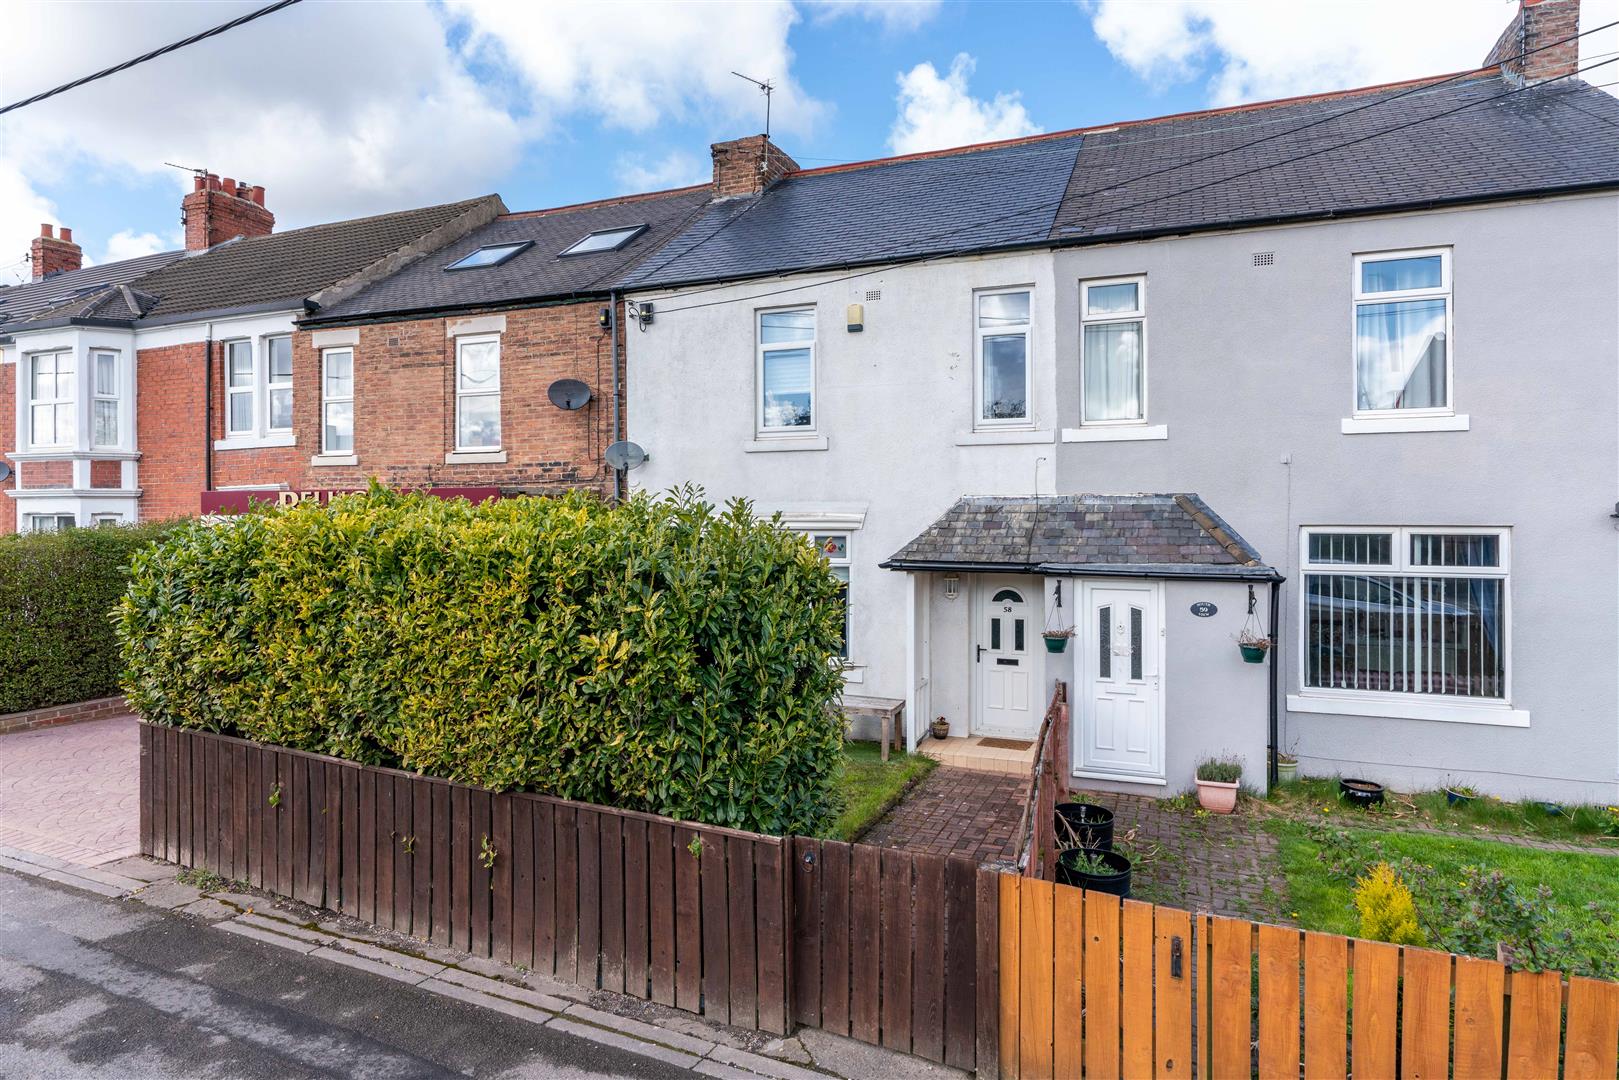 3 bed terraced house for sale in South View, Hazlerigg, NE13